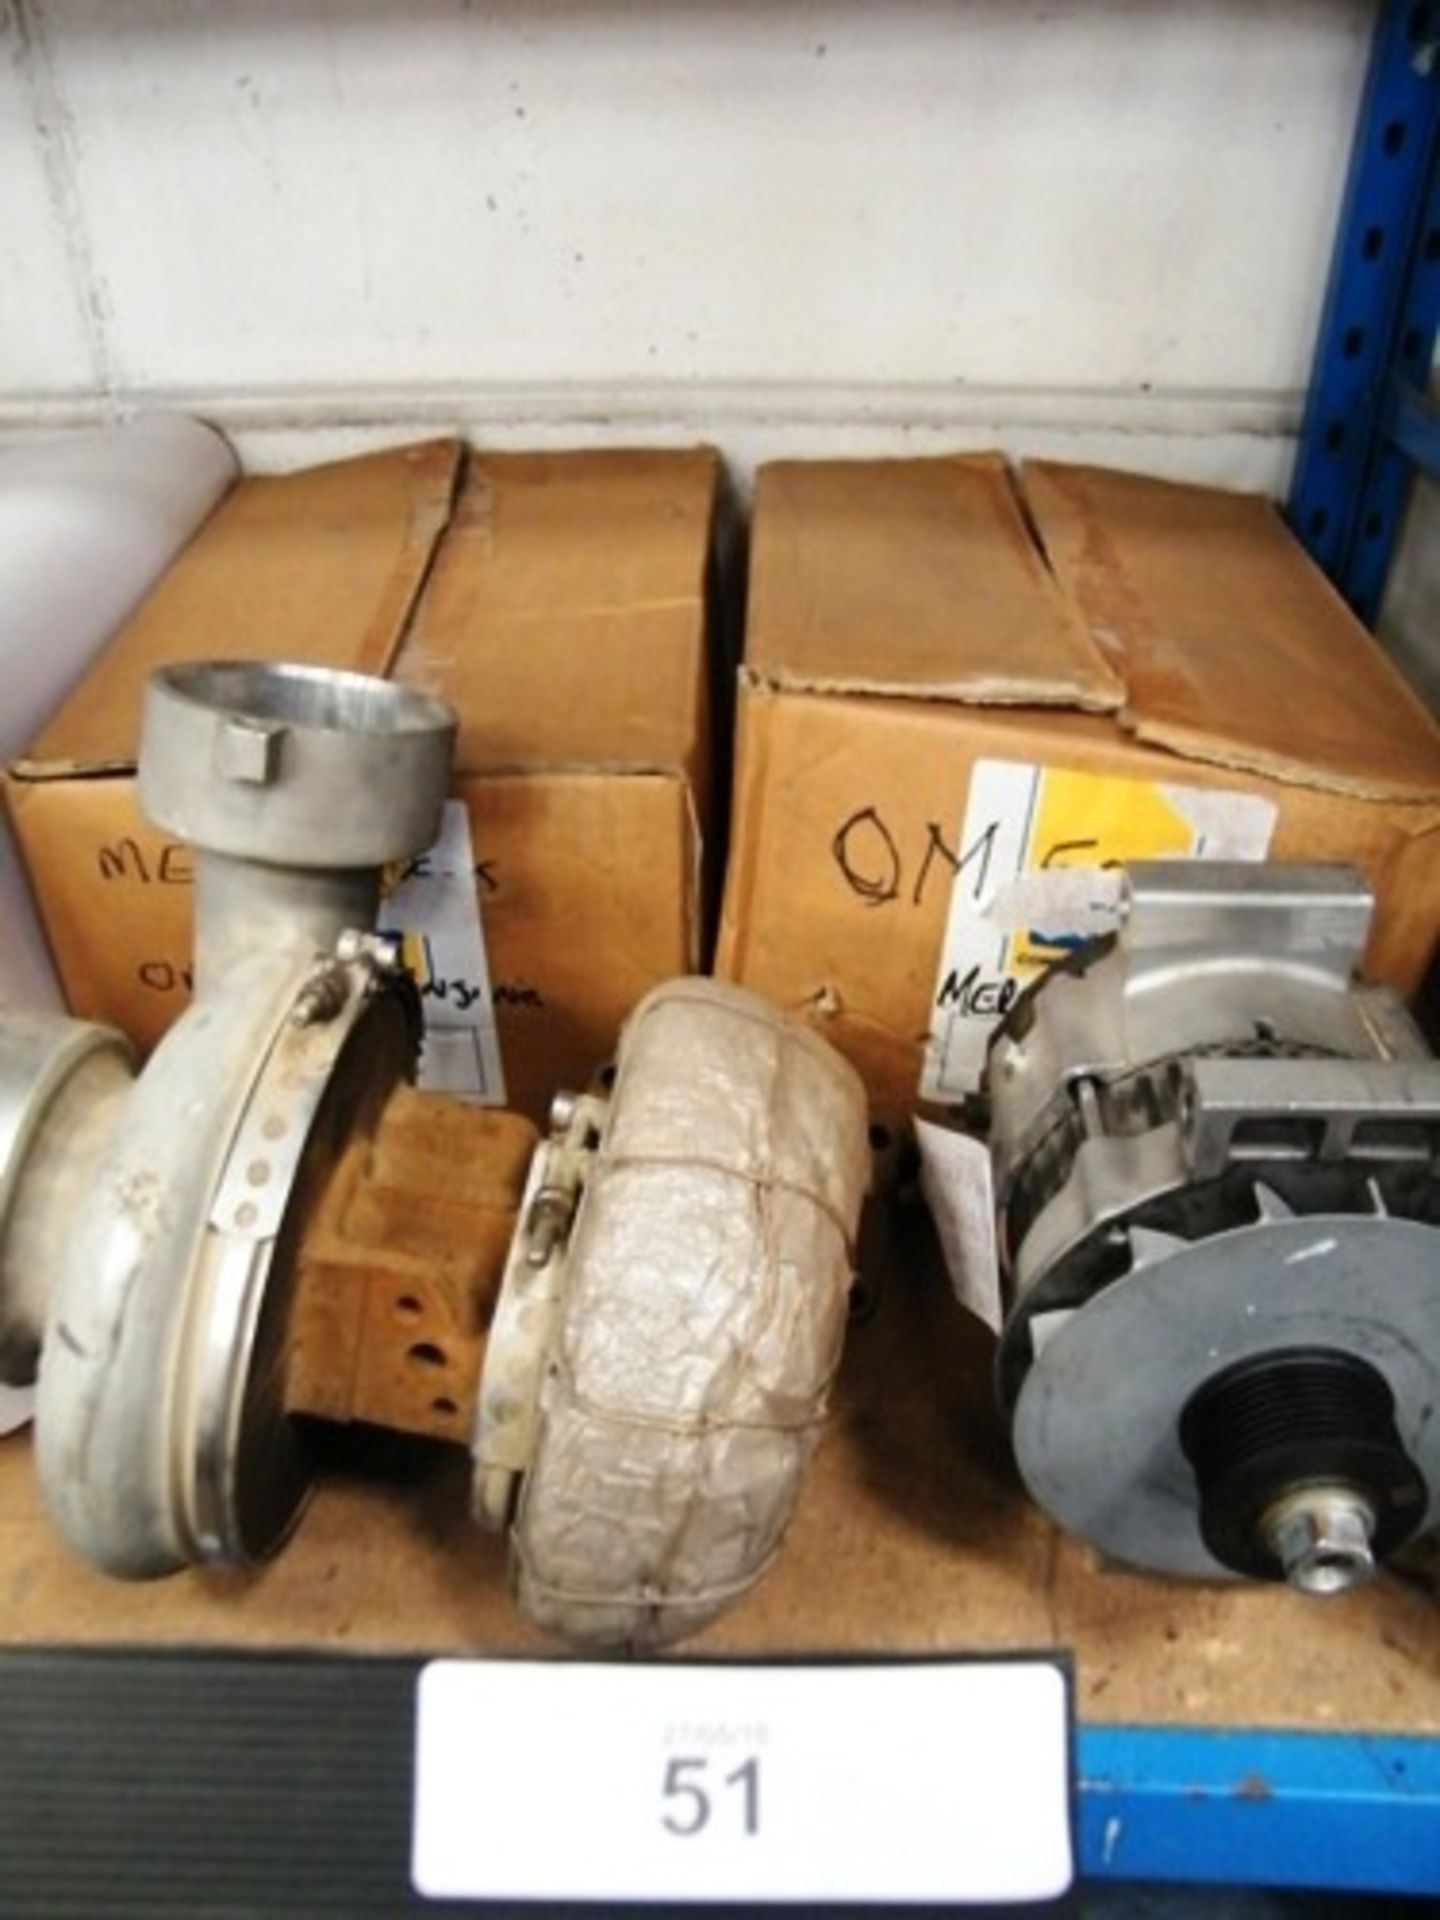 CAT alternator, 2 x Mercedes water pumps and a Mitsubishi turbo charger